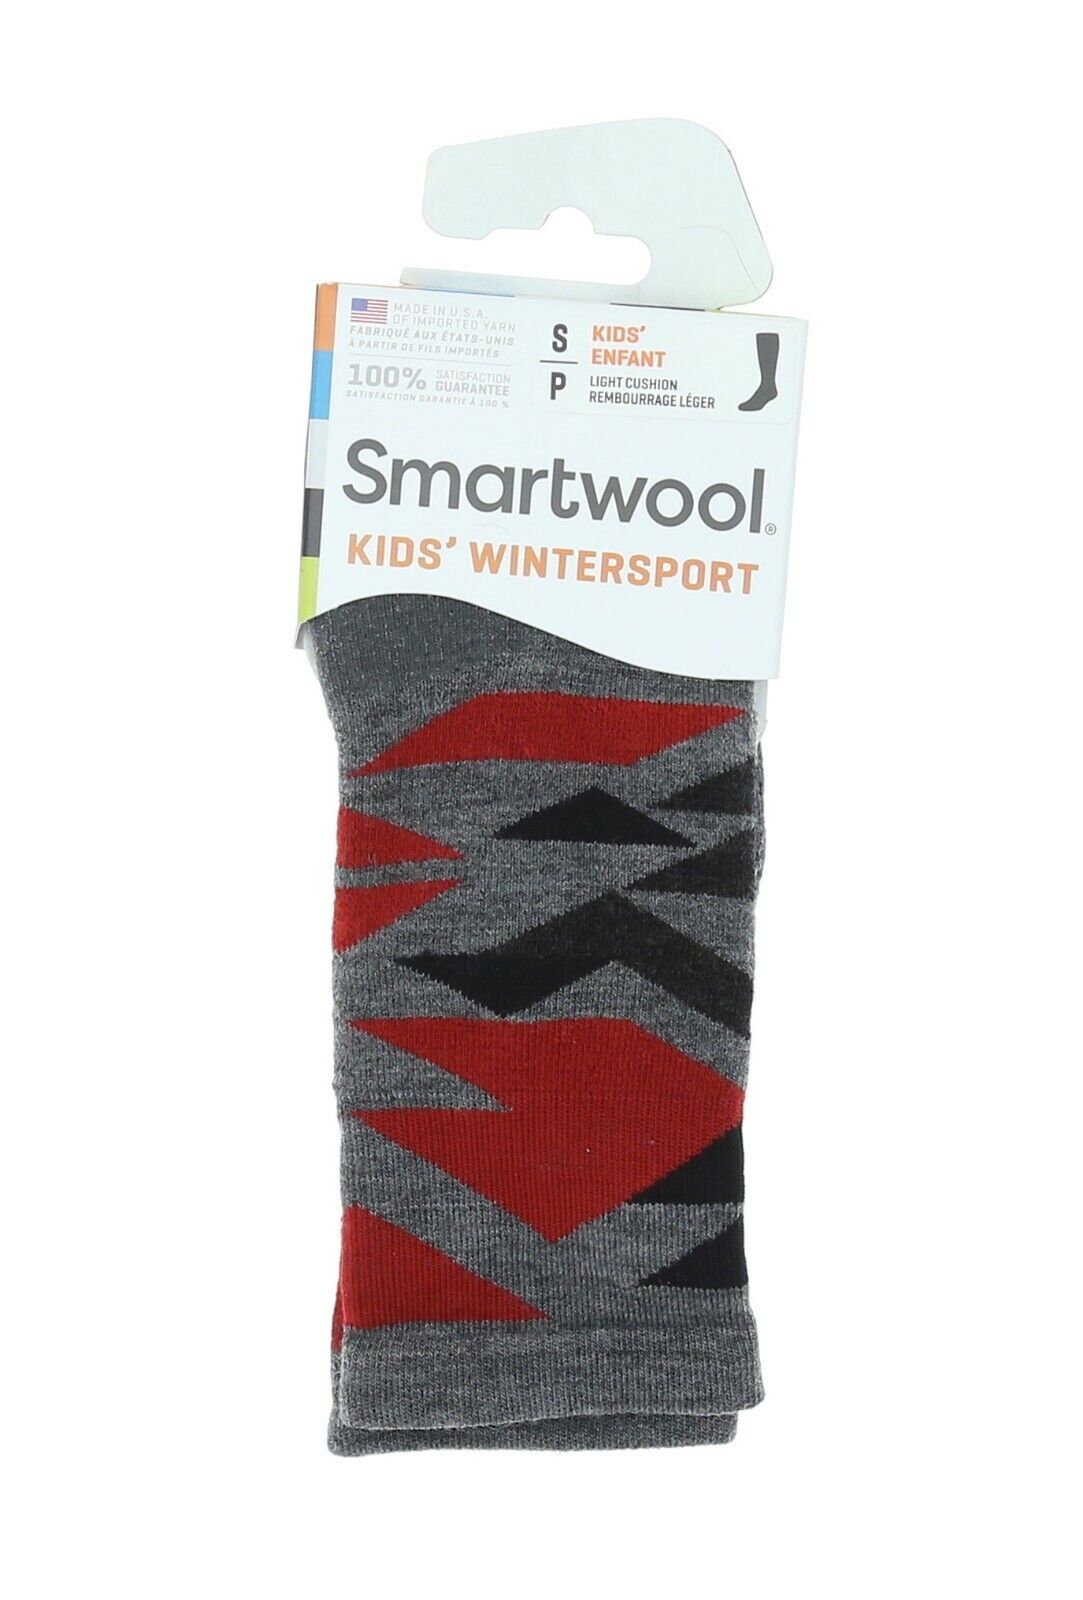 Smartwool Kids Wintersport Recommendation Neo Native in Gray Medium Socks Calf Animer and price revision